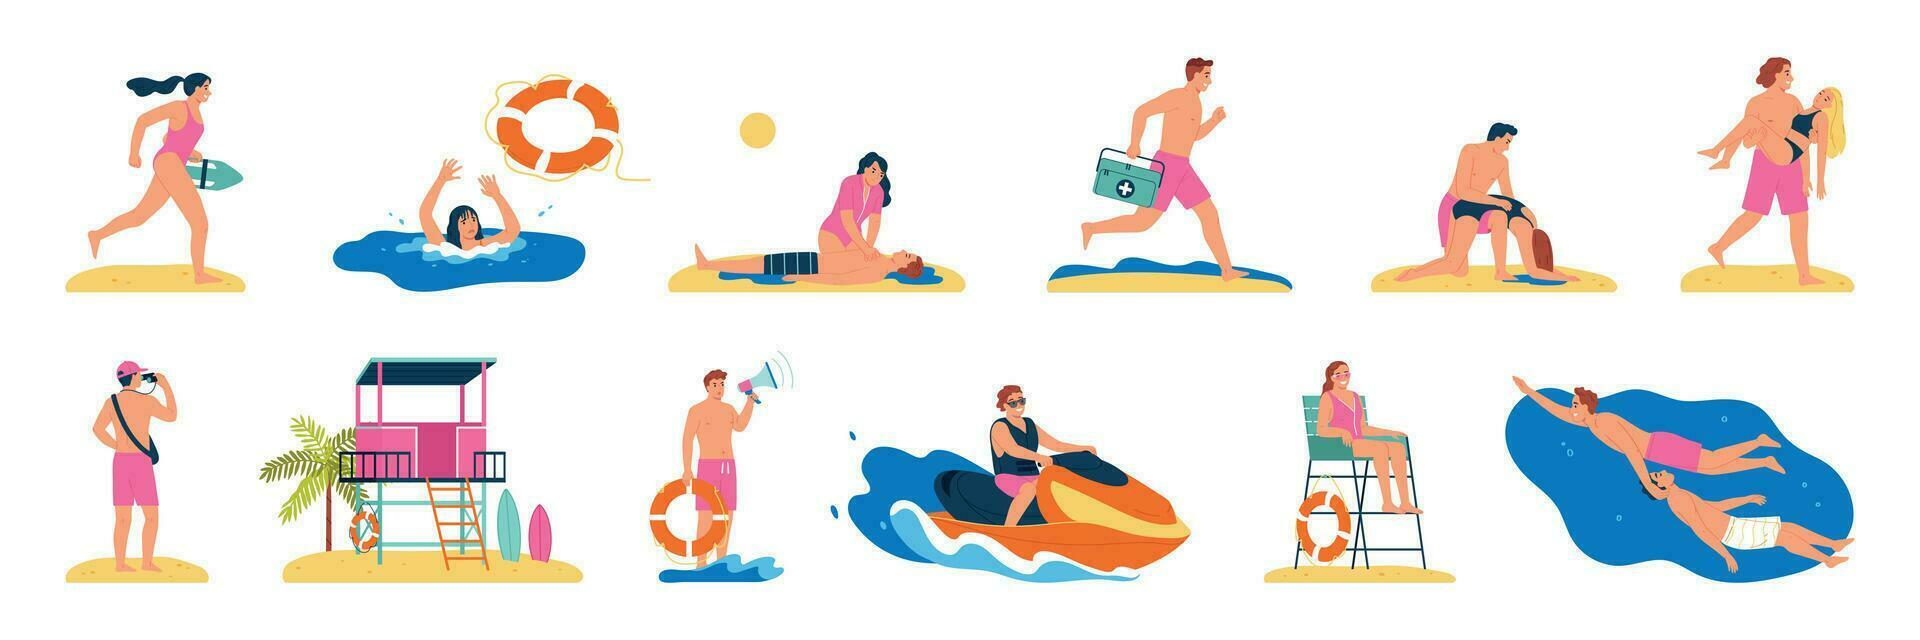 Lifeguard Profession Icons Collection vector